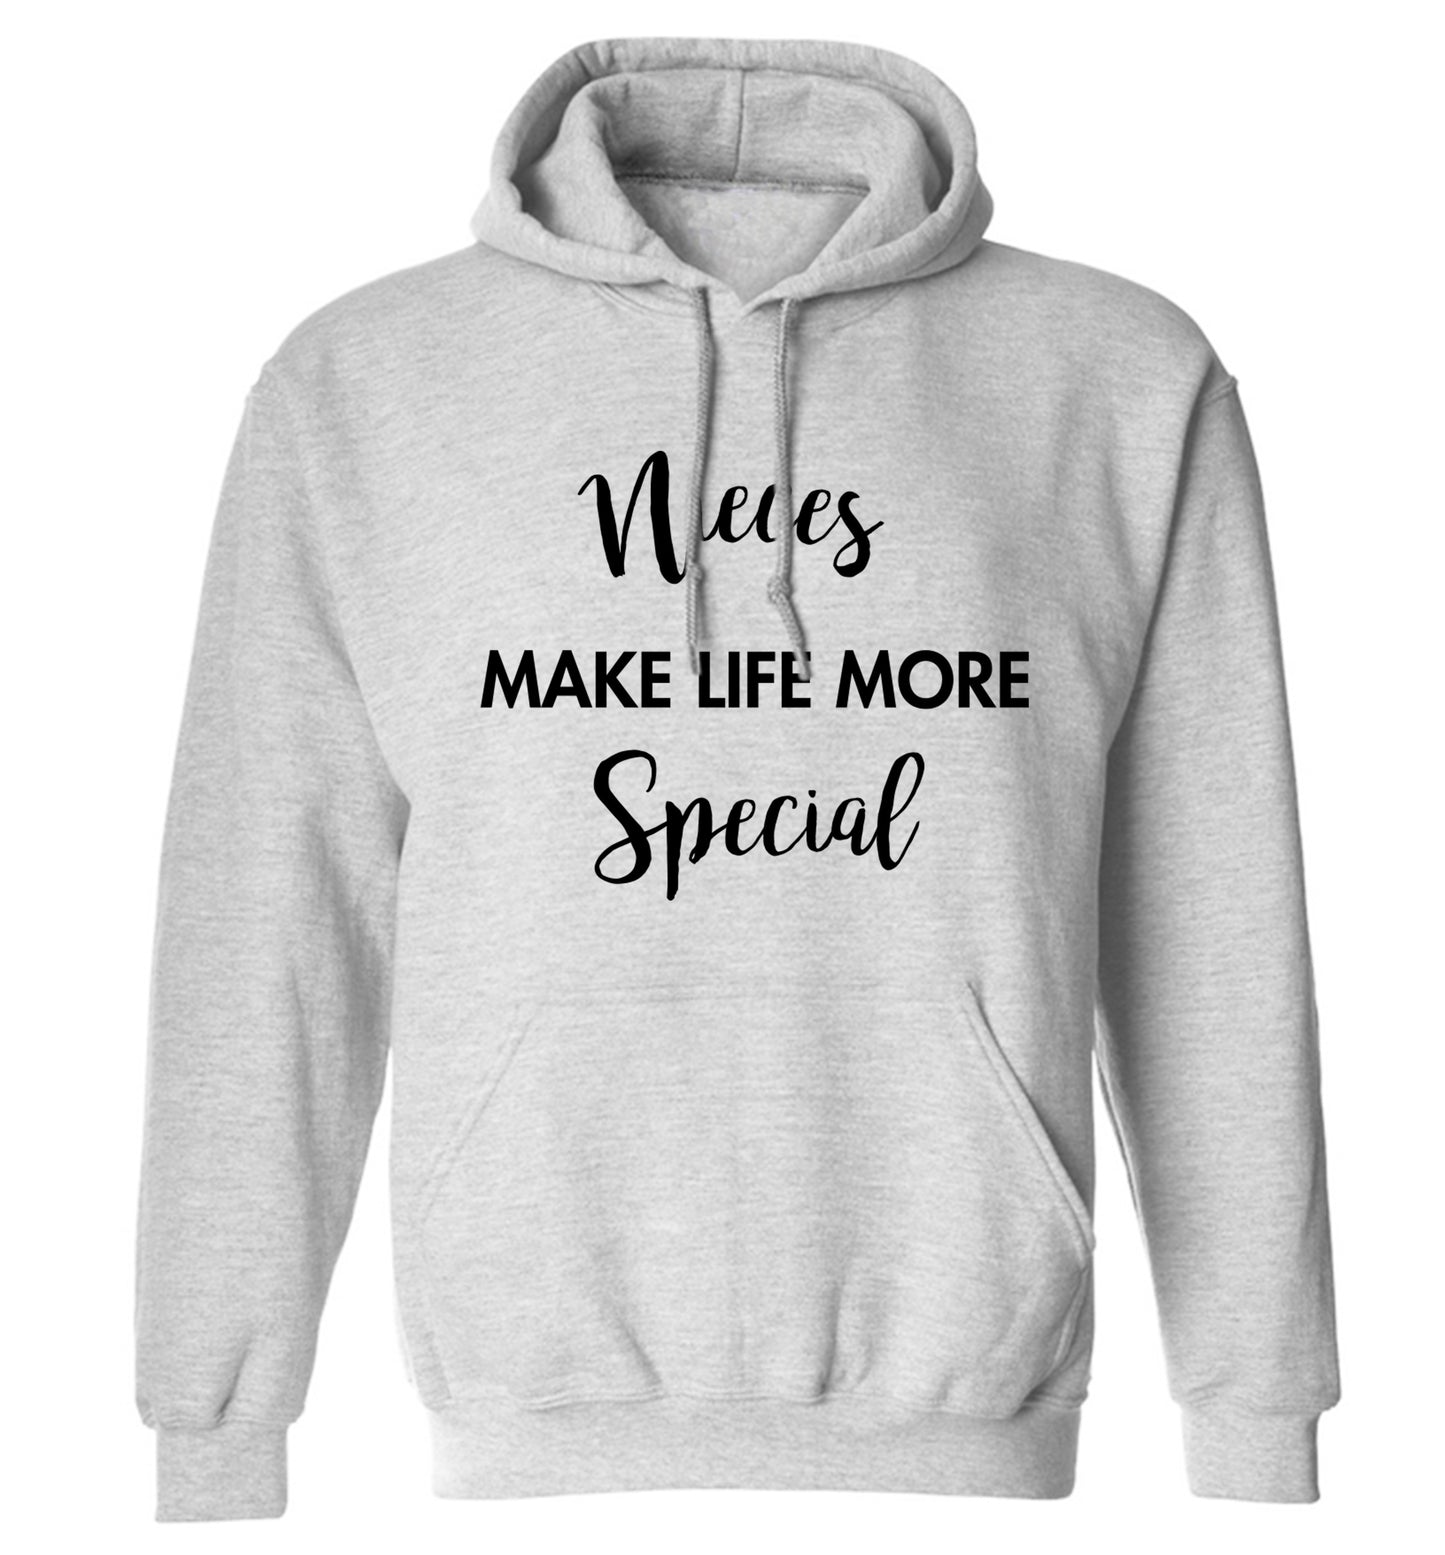 Nieces make life more special adults unisex grey hoodie 2XL